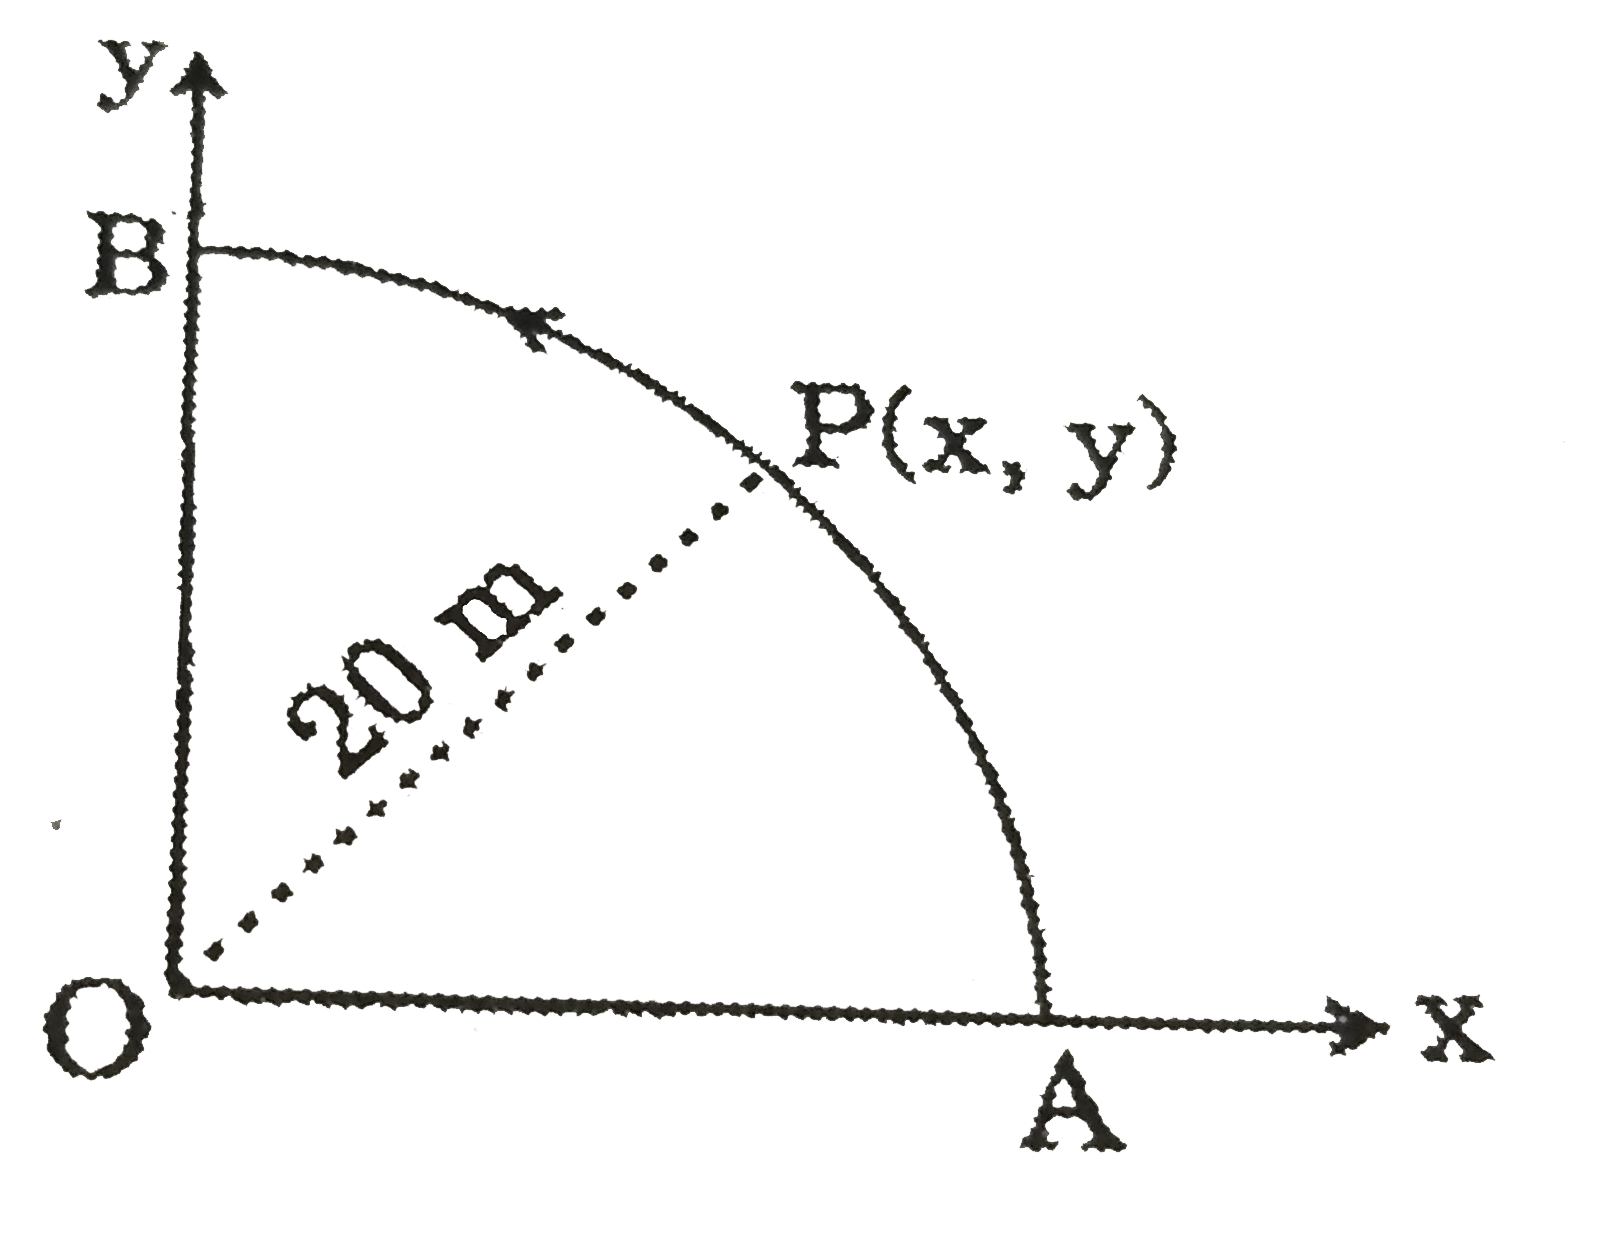 A point P moves in counter-clockwise direction on a circular path as shown in the figure. The movement of 'P' is such that it sweeps out a length s=t^(3)+5, where s is in metres and t is in seconds. The radius of the path is 20 m. The acceleartion of 'P' when t = 2 s is nearly